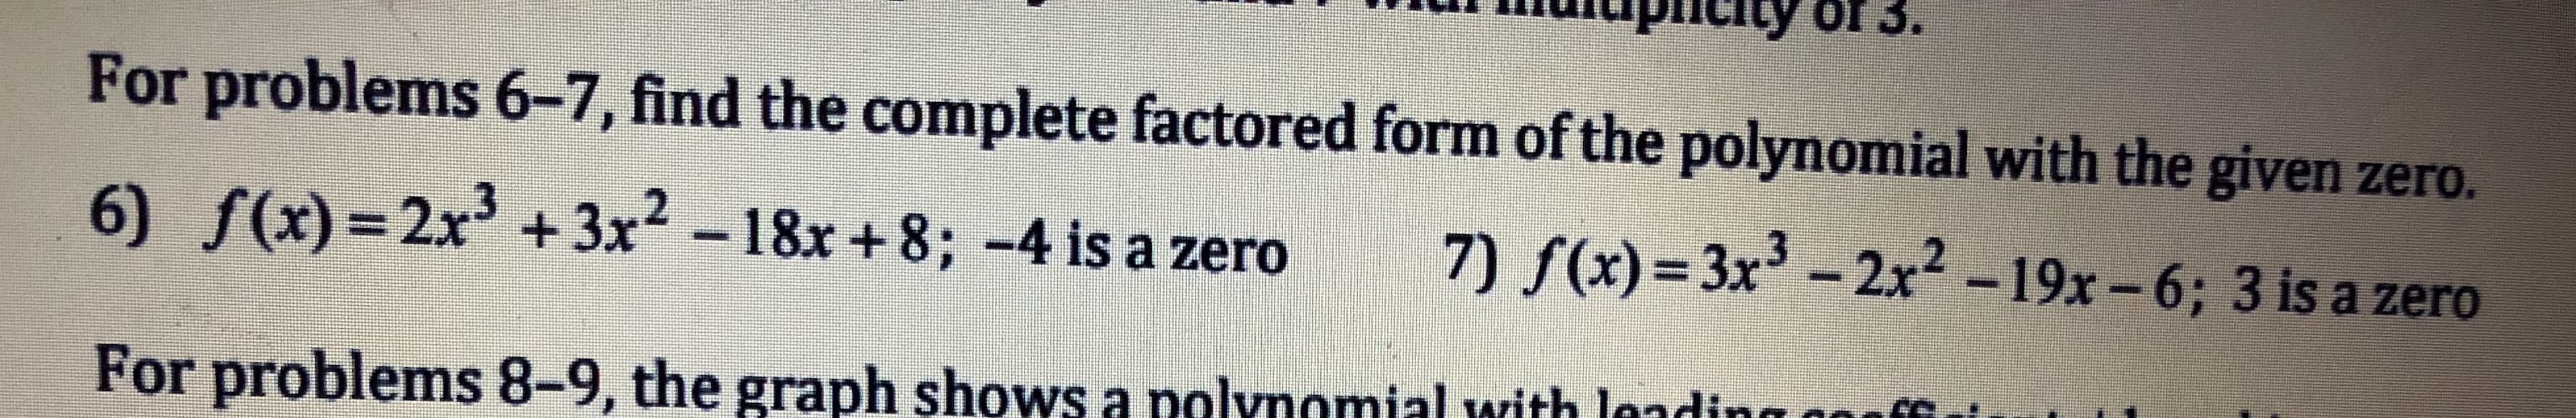 For problems 6-7, find the complete factored form of the polynomial with the given zero.
6) f(x) 2x3 3x2 -18x+8; -4 is a zero 7(x)-3x3 -2x2 -19x -6; 3 is a zero
For problems 8-9, the graph shows a nalynomial with lndin
